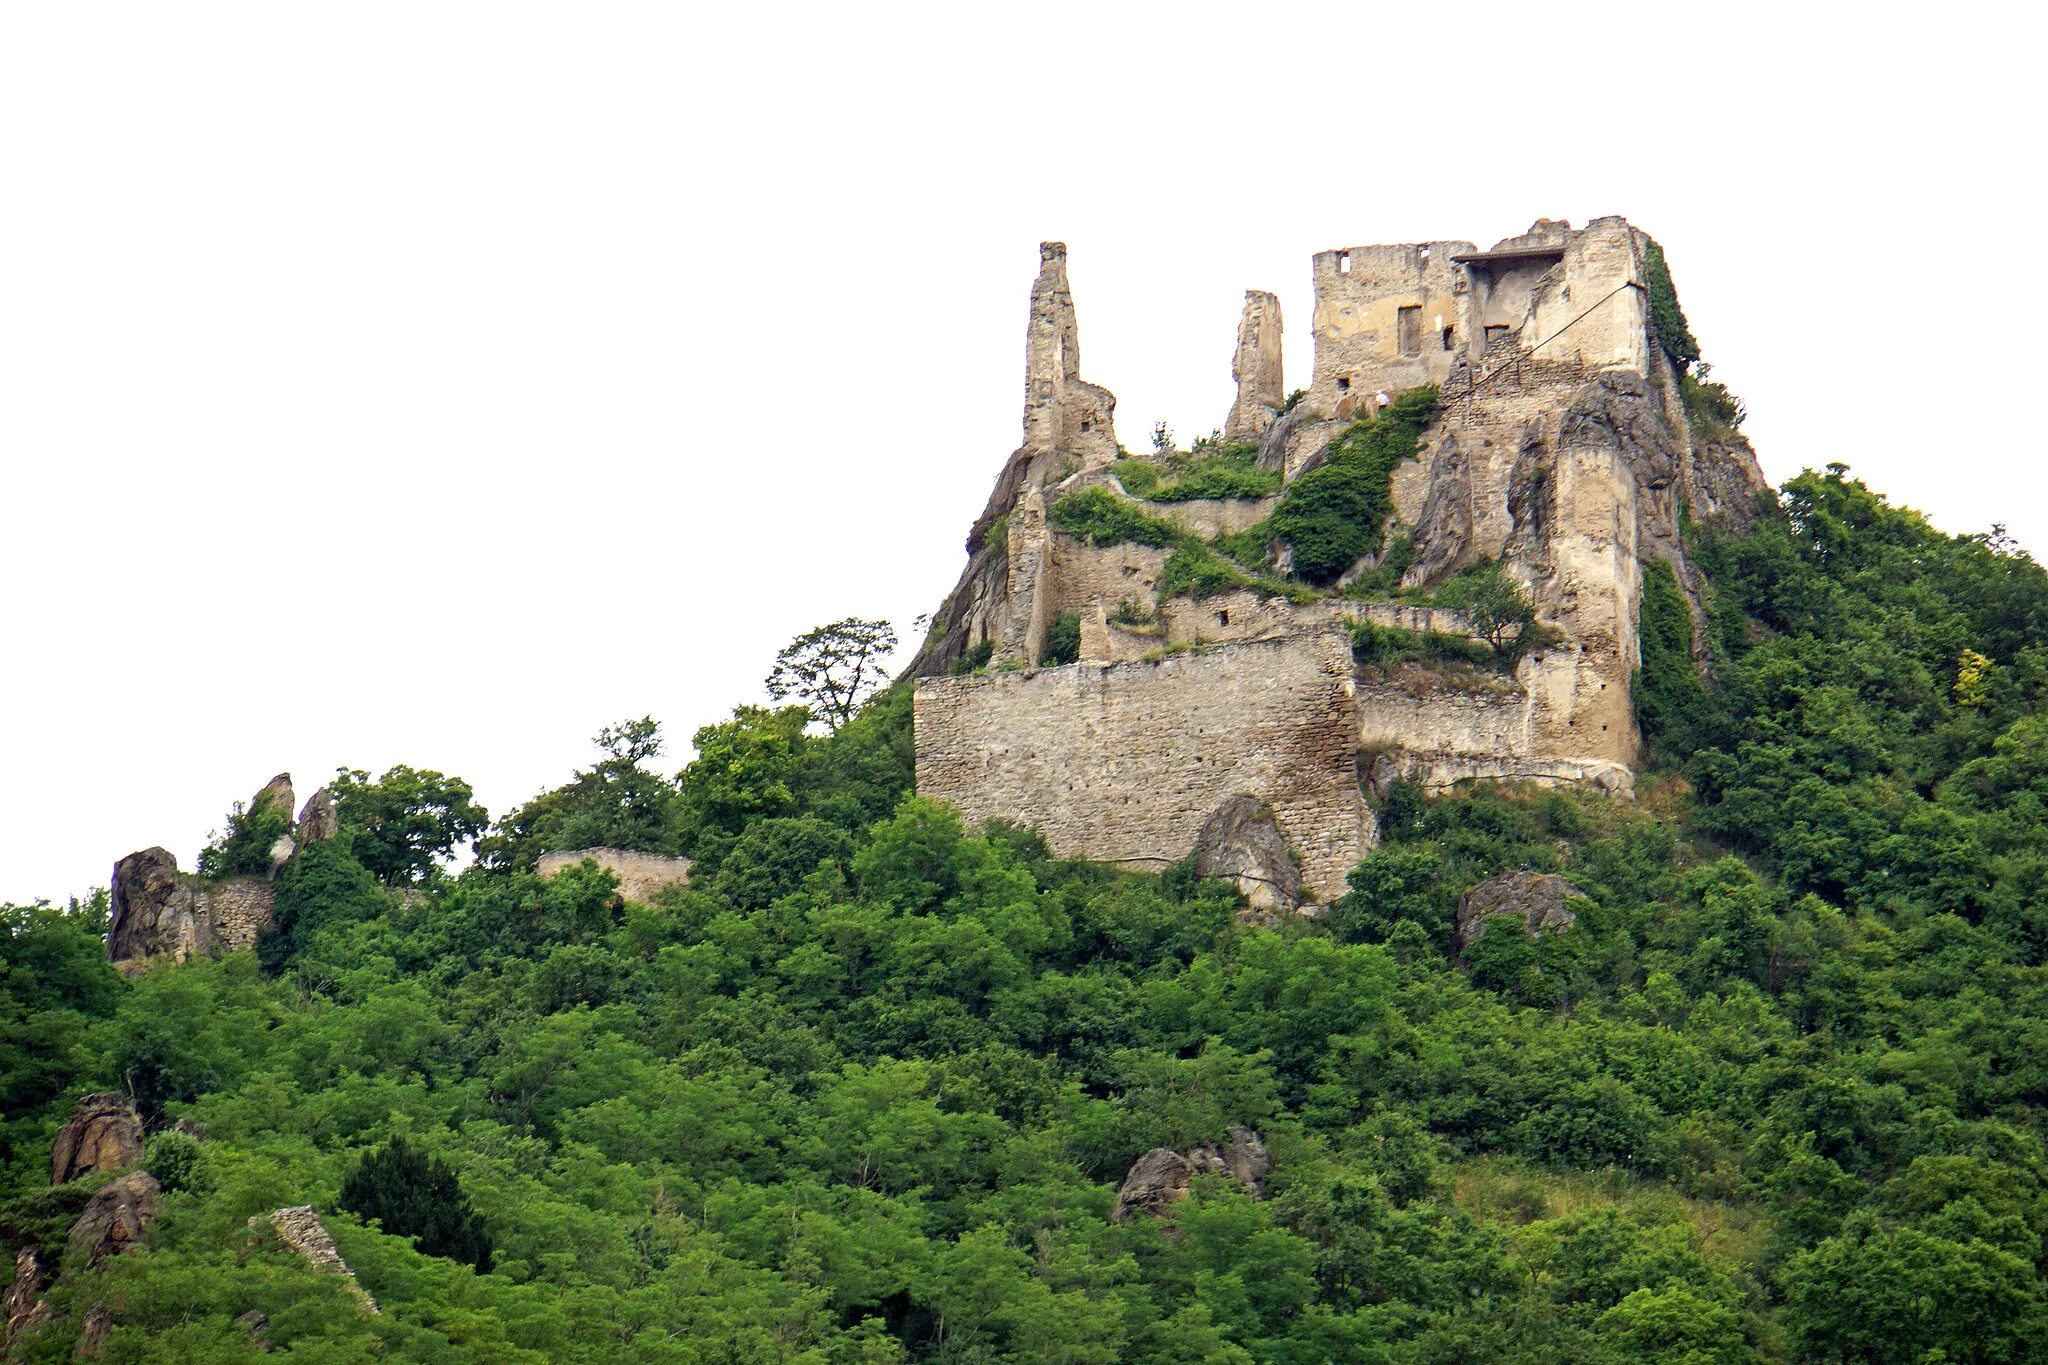 Photo showing: Dürnstein was first mentioned in 1192, King Richard I of England was held captive by Leopold V, Duke of Austria after their dispute during the Third Crusade. Richard the Lionheart had offended Leopold the Virtuous by casting down his standard from the walls at the Battle of Acre.